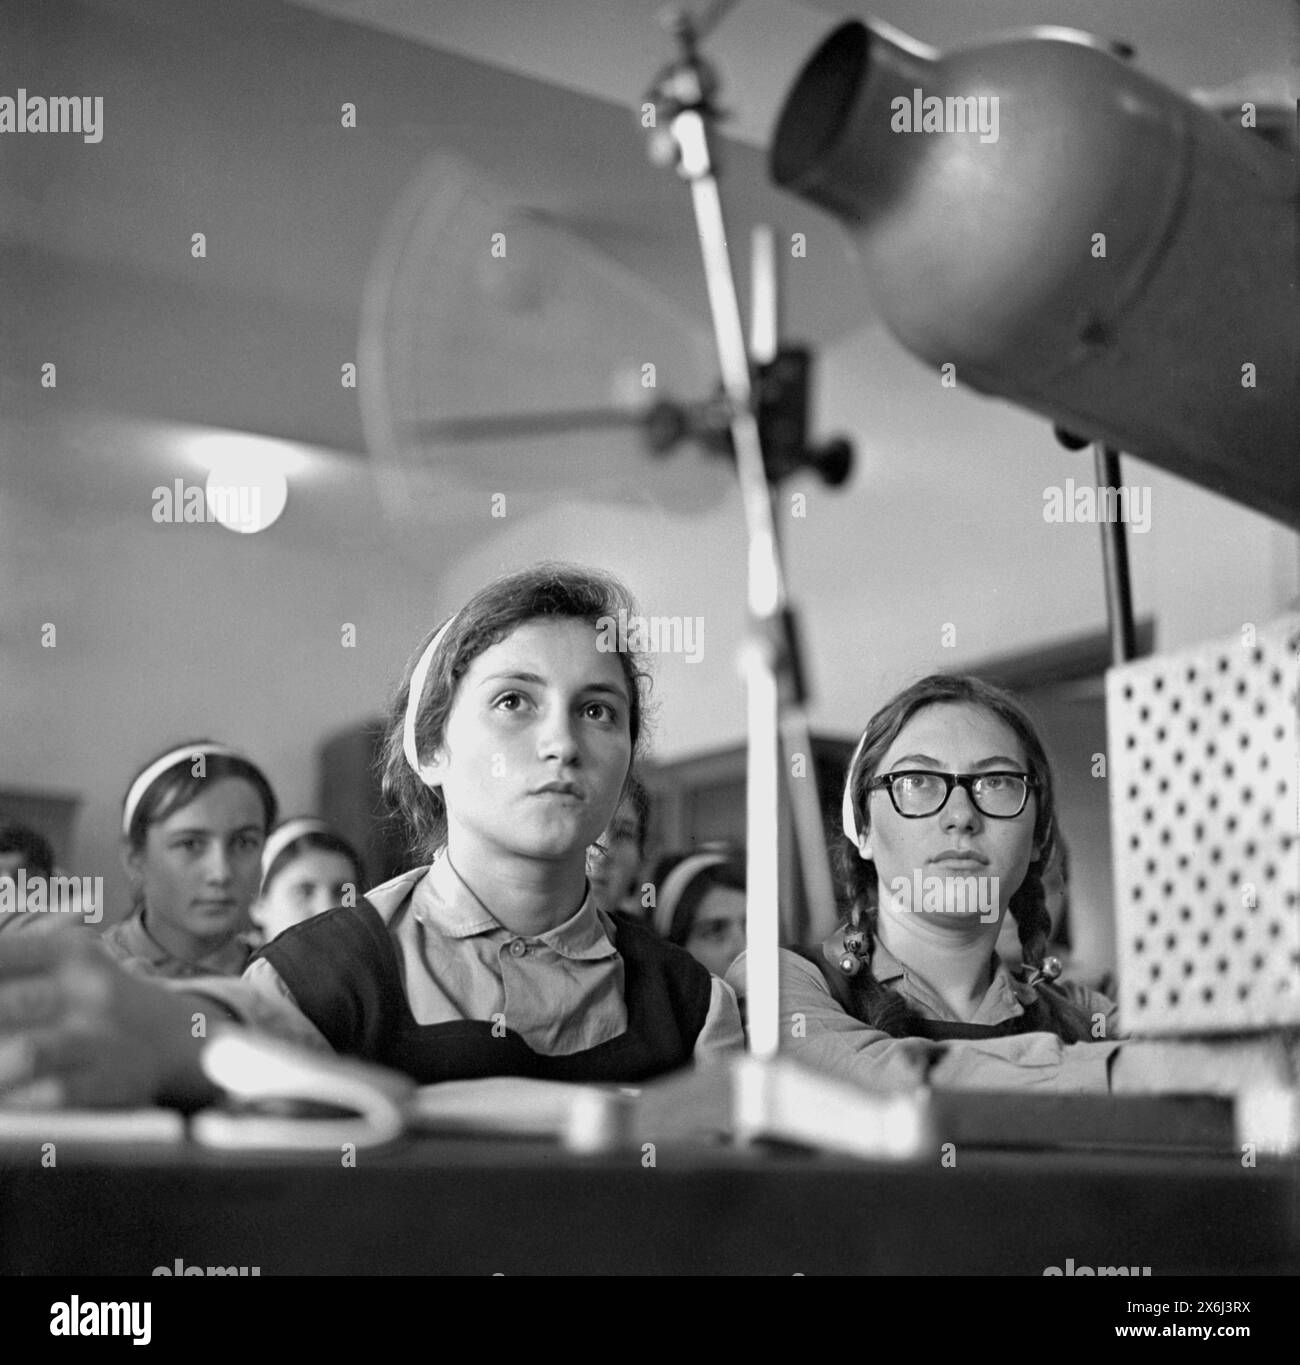 Socialist Republic of Romania in the 1970s. Students during a mechanical engineering class in a governmental school. Stock Photo